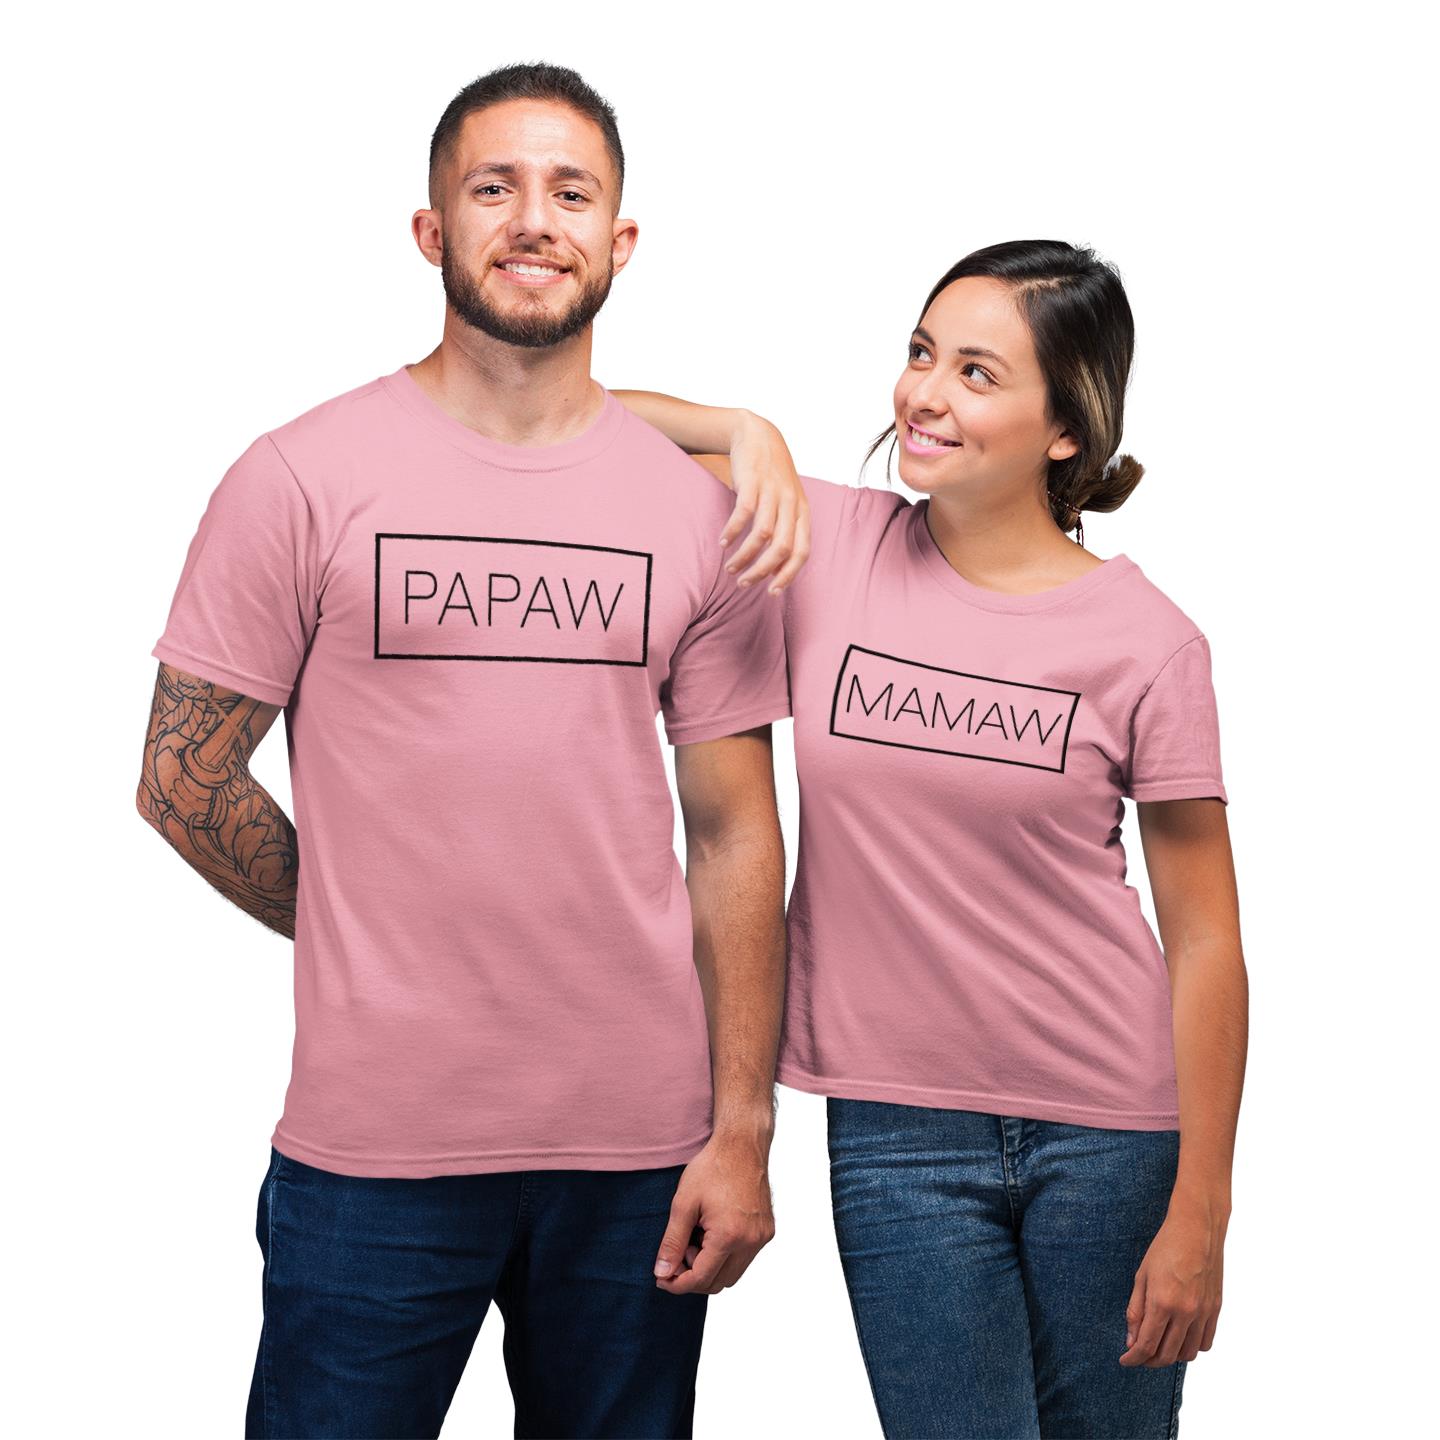 Papaw and Mamaw Funny Matching For Couple Gift For Wife Husband Dad Mom T-Shirt